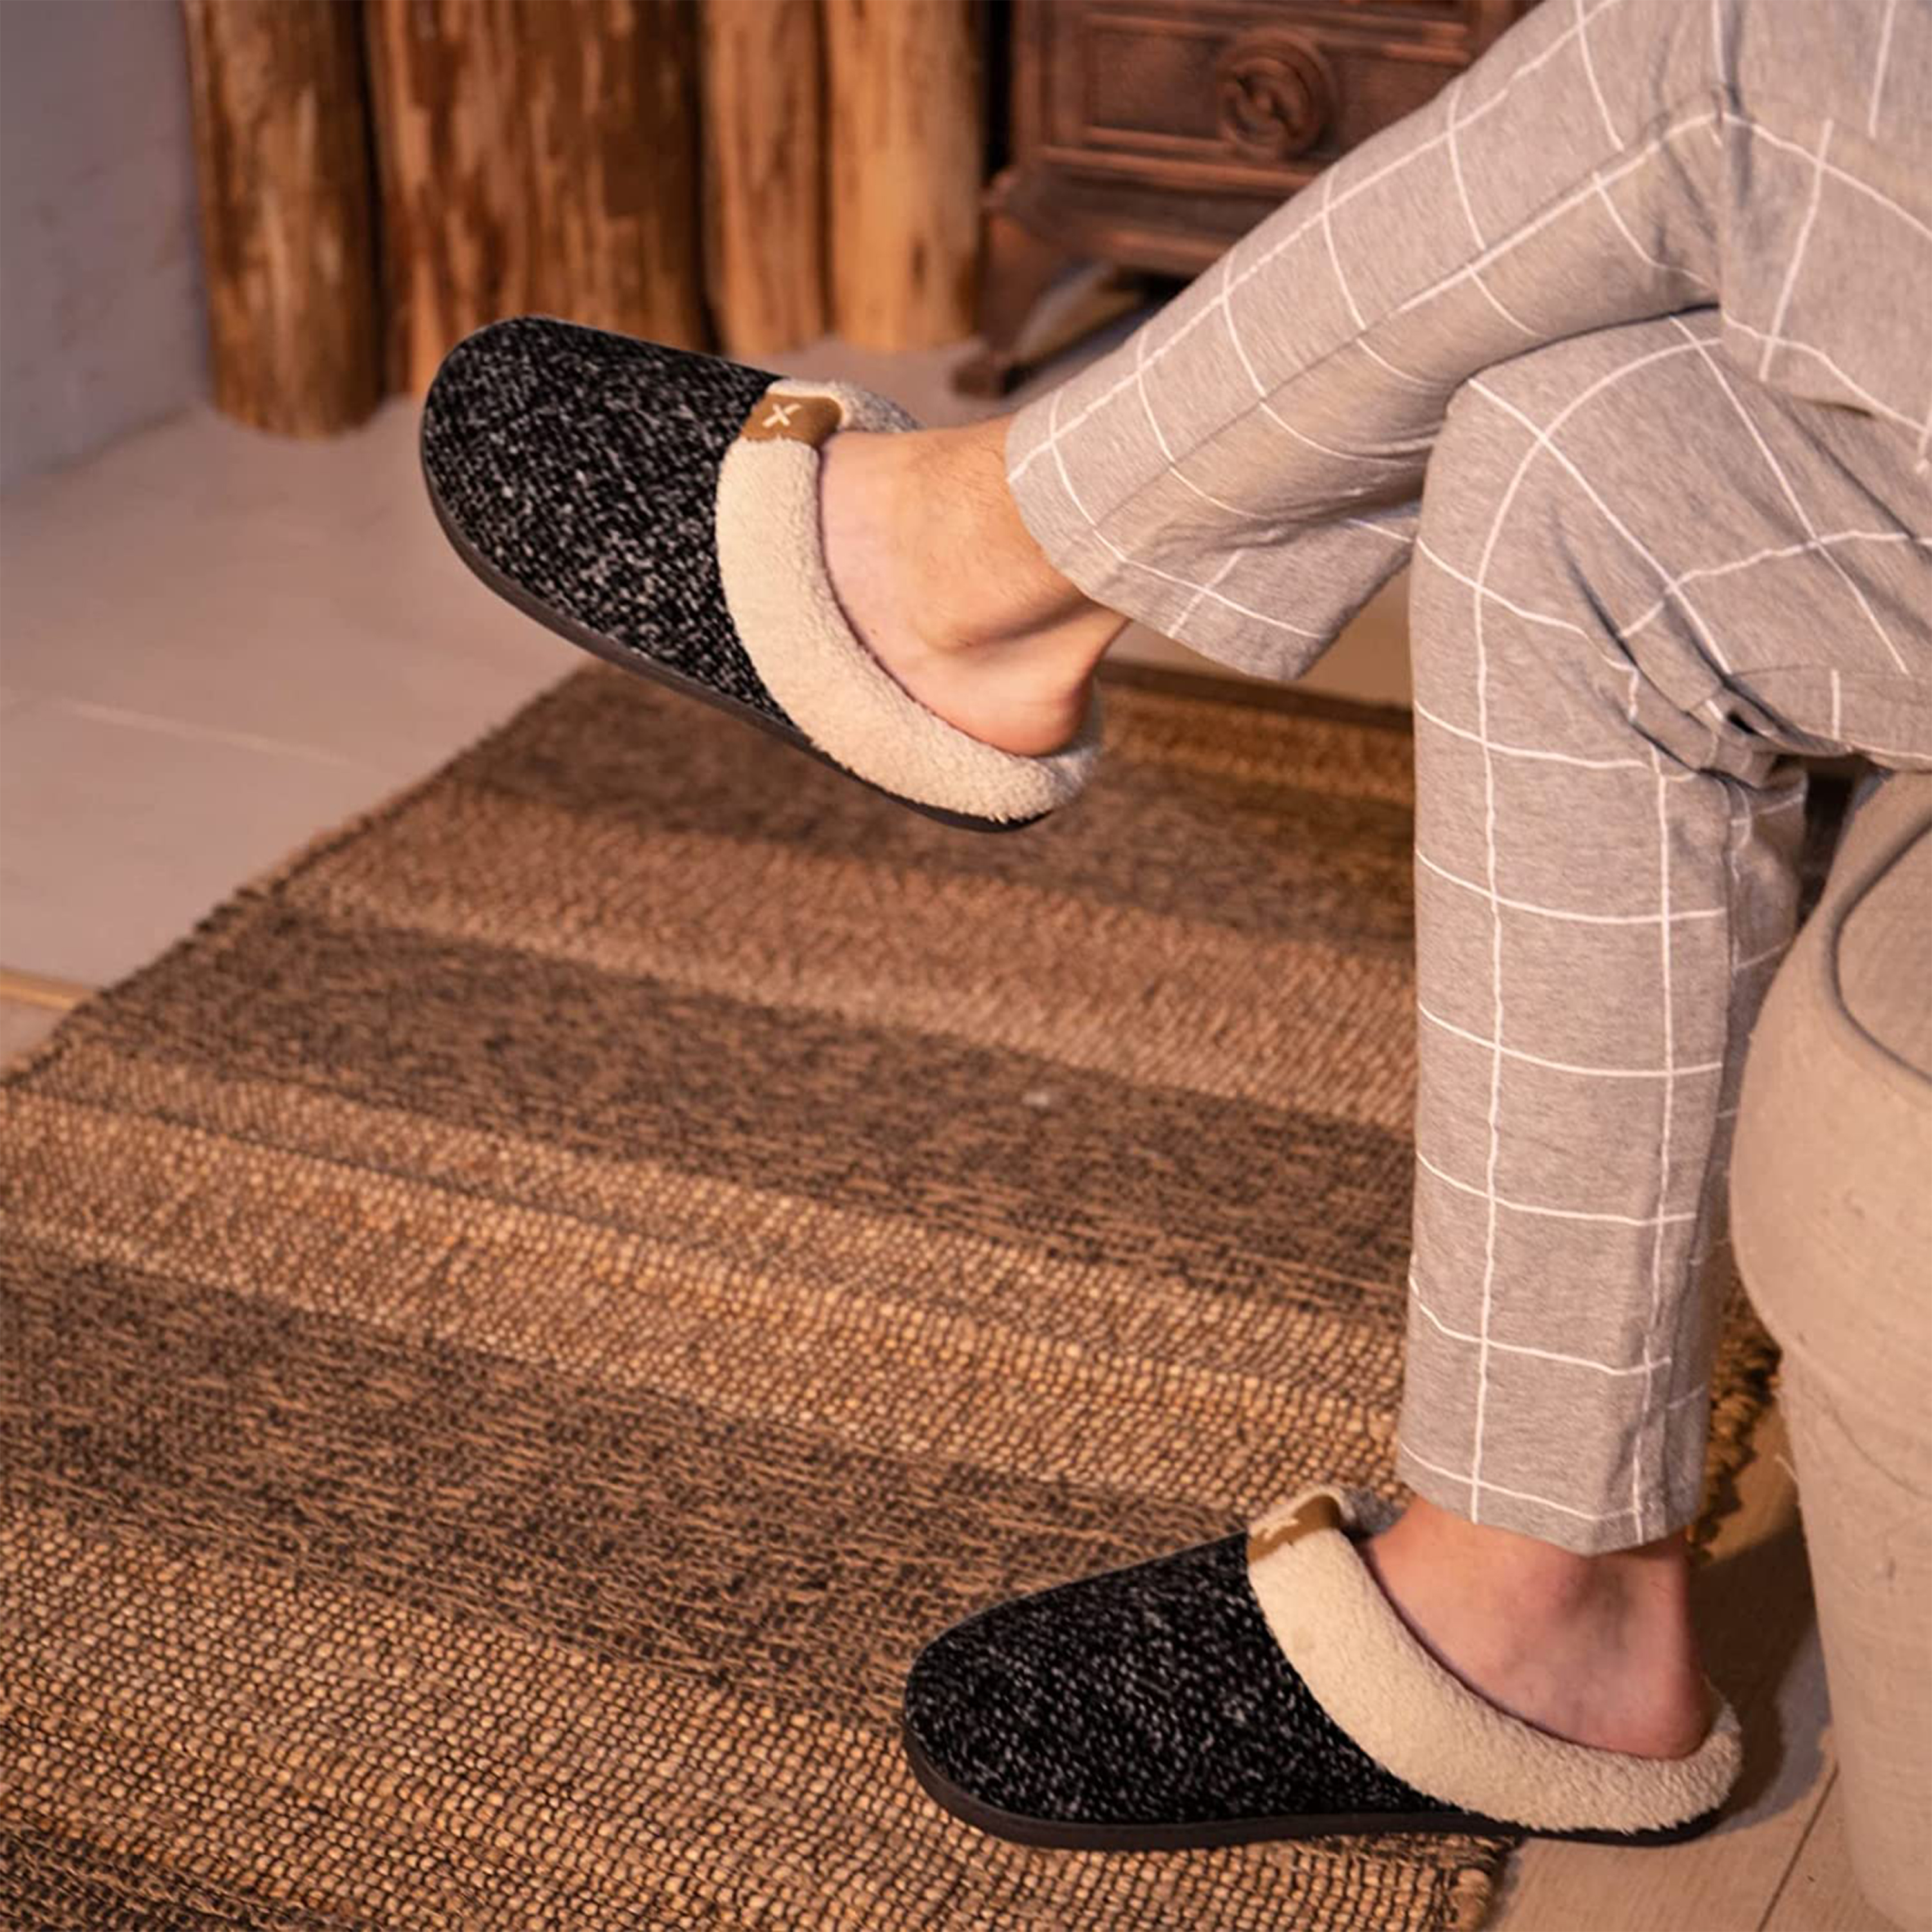 Men's Cozy Memory Foam Slippers with Fuzzy Plush Wool-Like Lining, Slip on Clog House Shoes with Indoor Outdoor Anti-Skid Rubber Sole - image 2 of 5